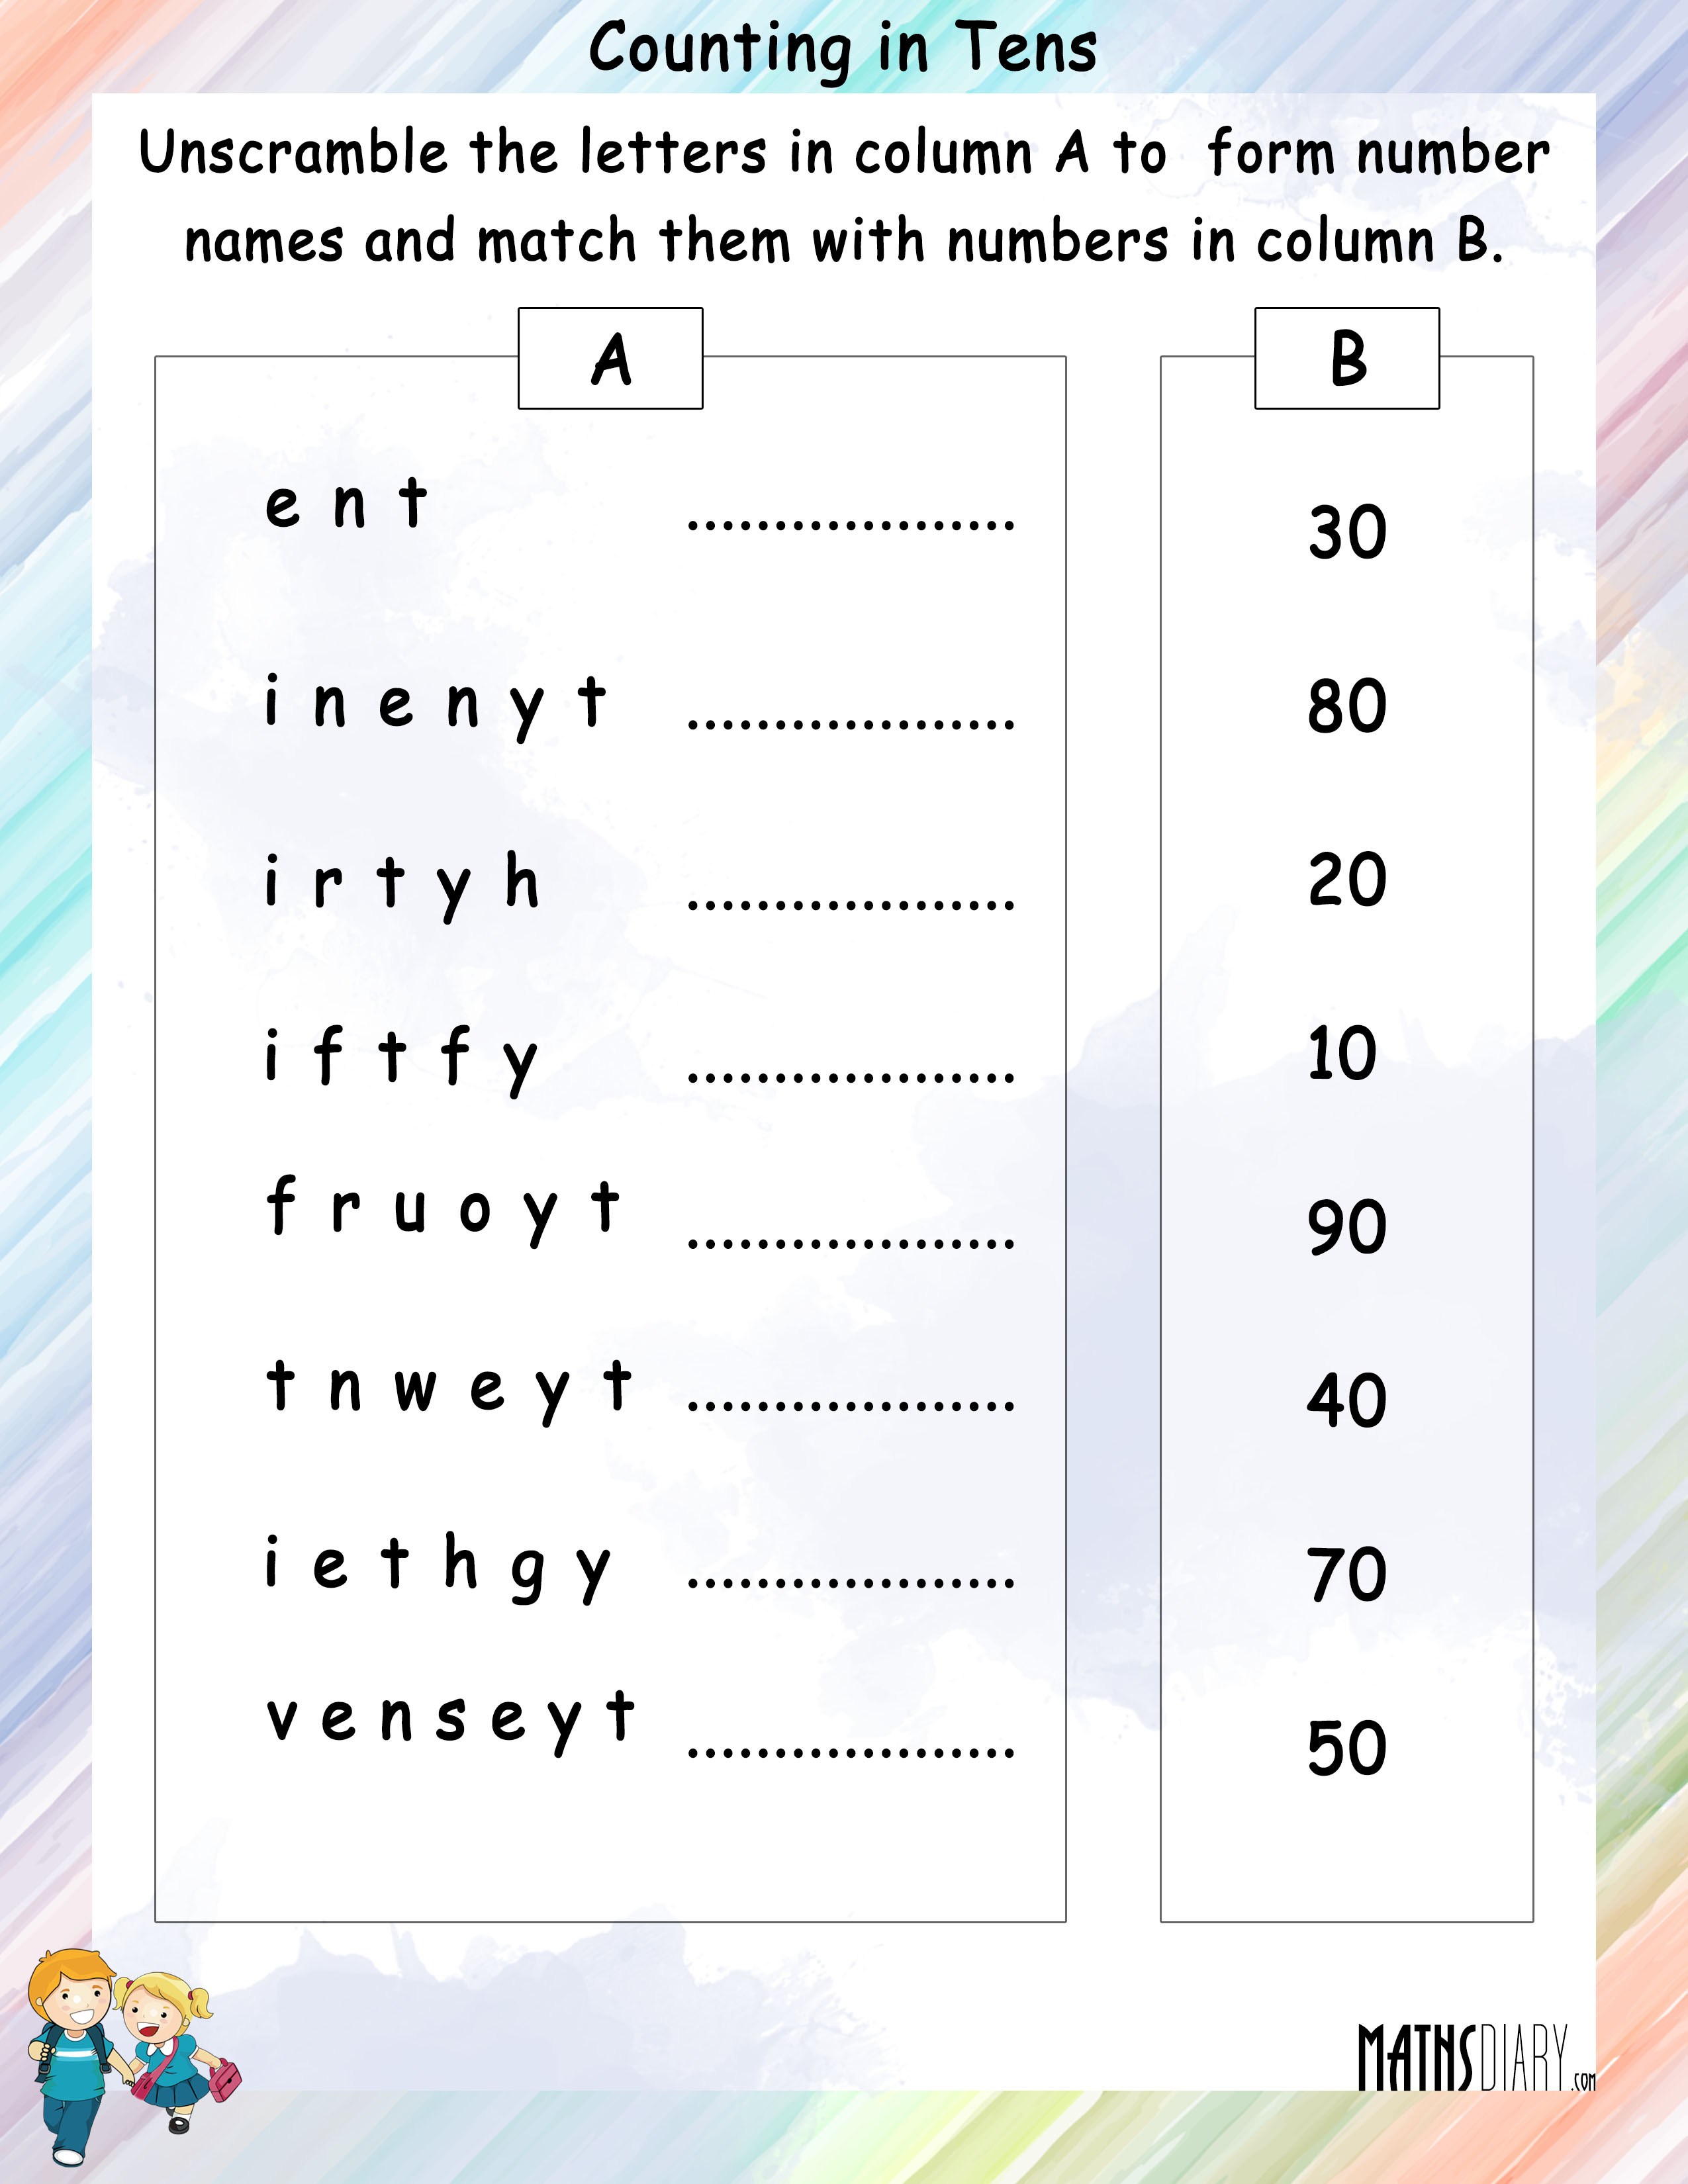 Unscramble Letters To Form Number Names Math Worksheets MathsDiary